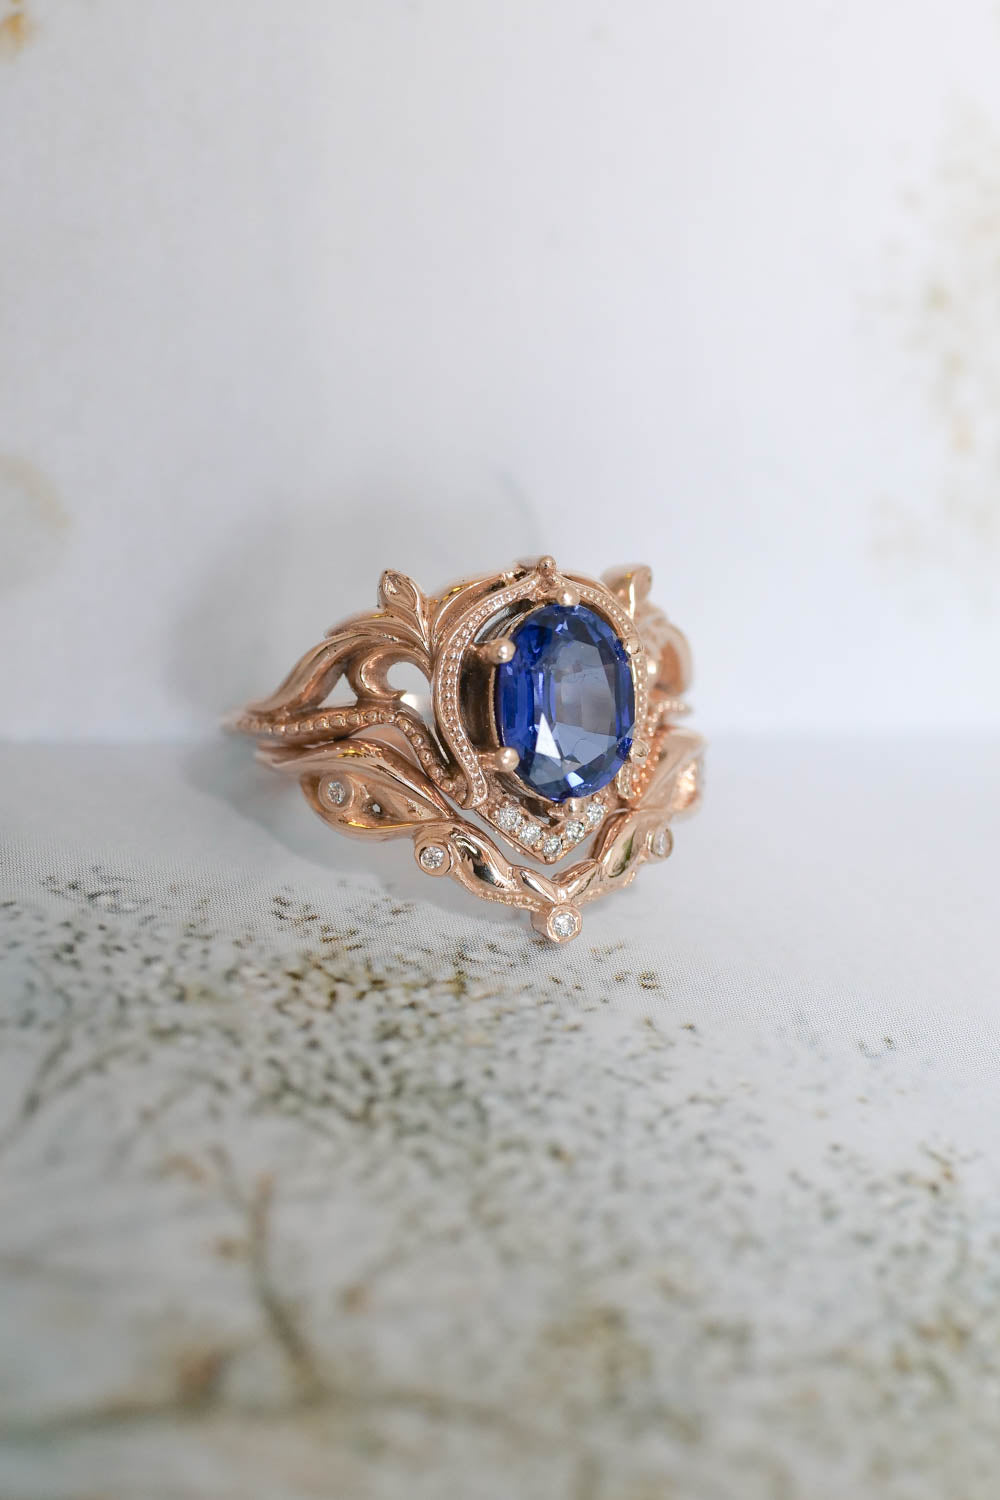 rings with sapphires and diamonds, rose gold wedding ring set for bride